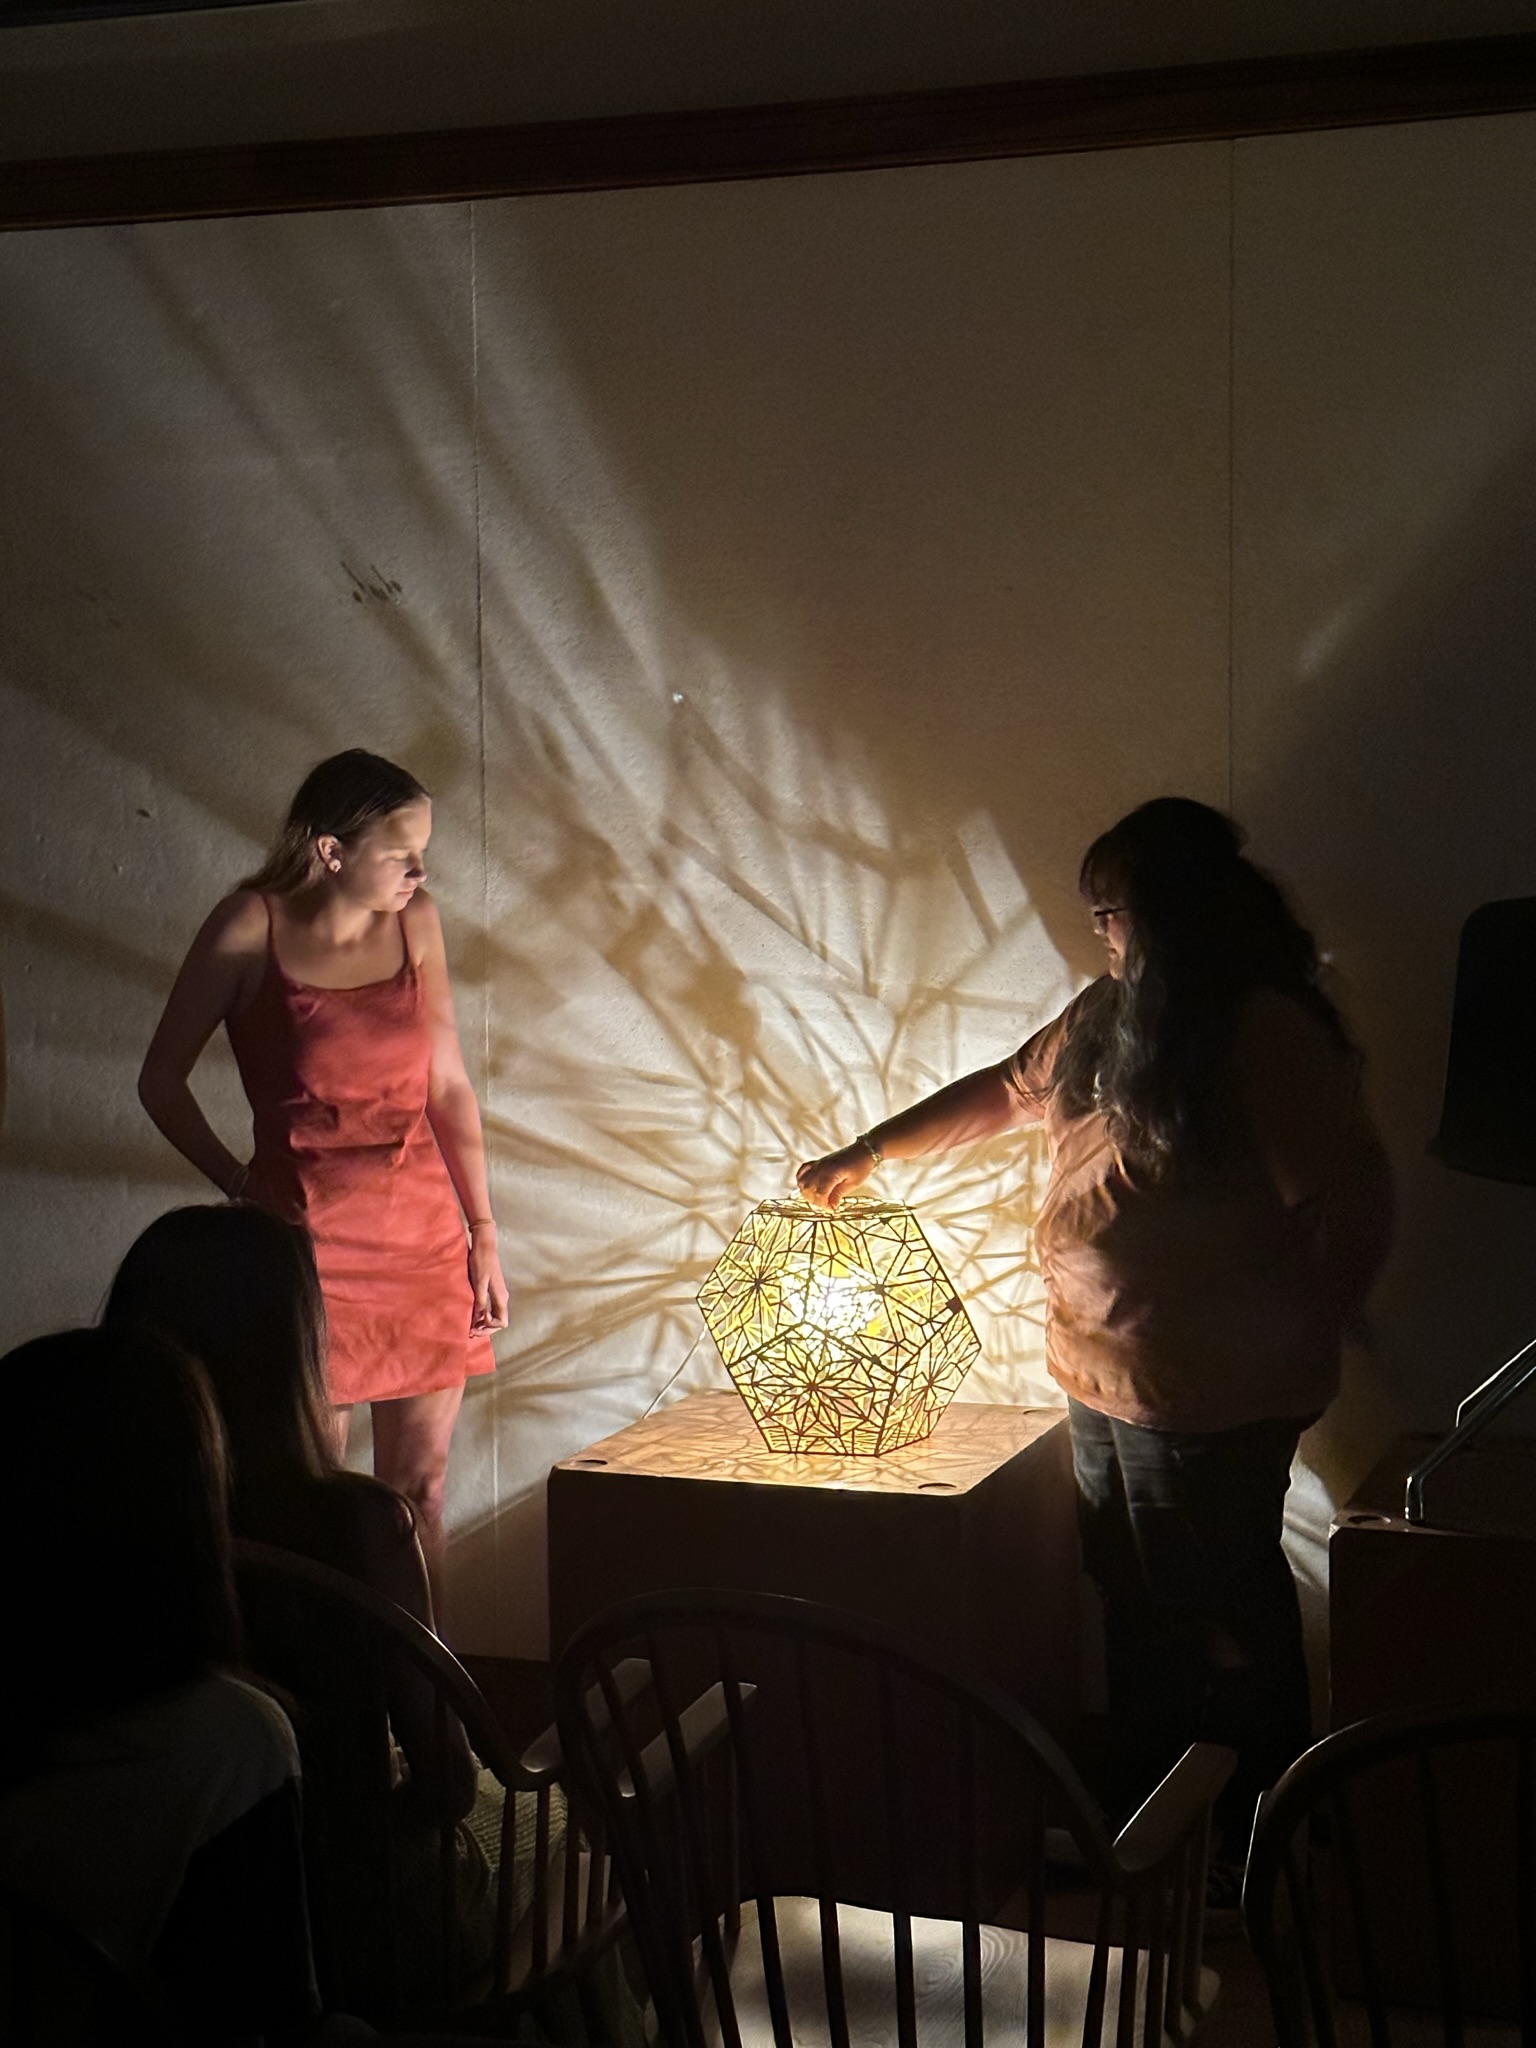 Students presenting their lamp, illuminated by the interplay of shadow and light